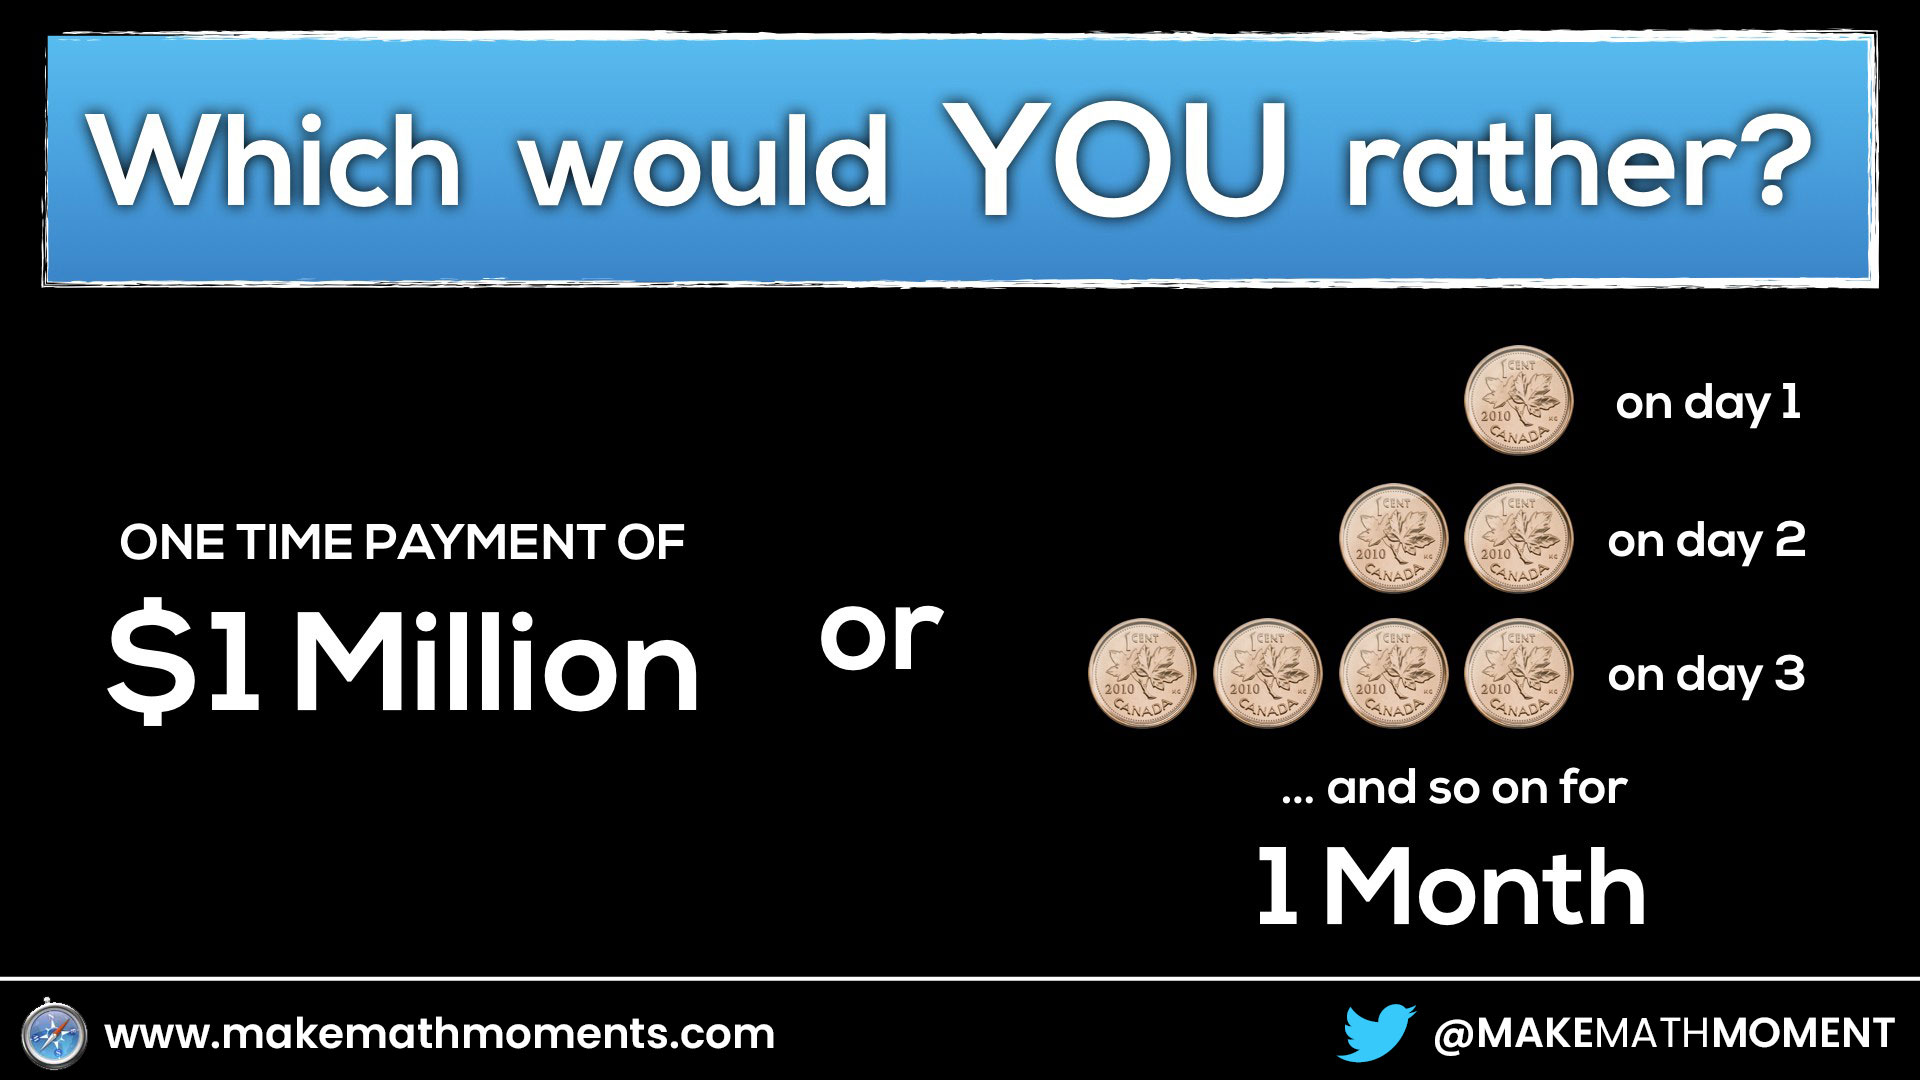 Compound Interest - Would You Rather a Penny a Day or $1 Million